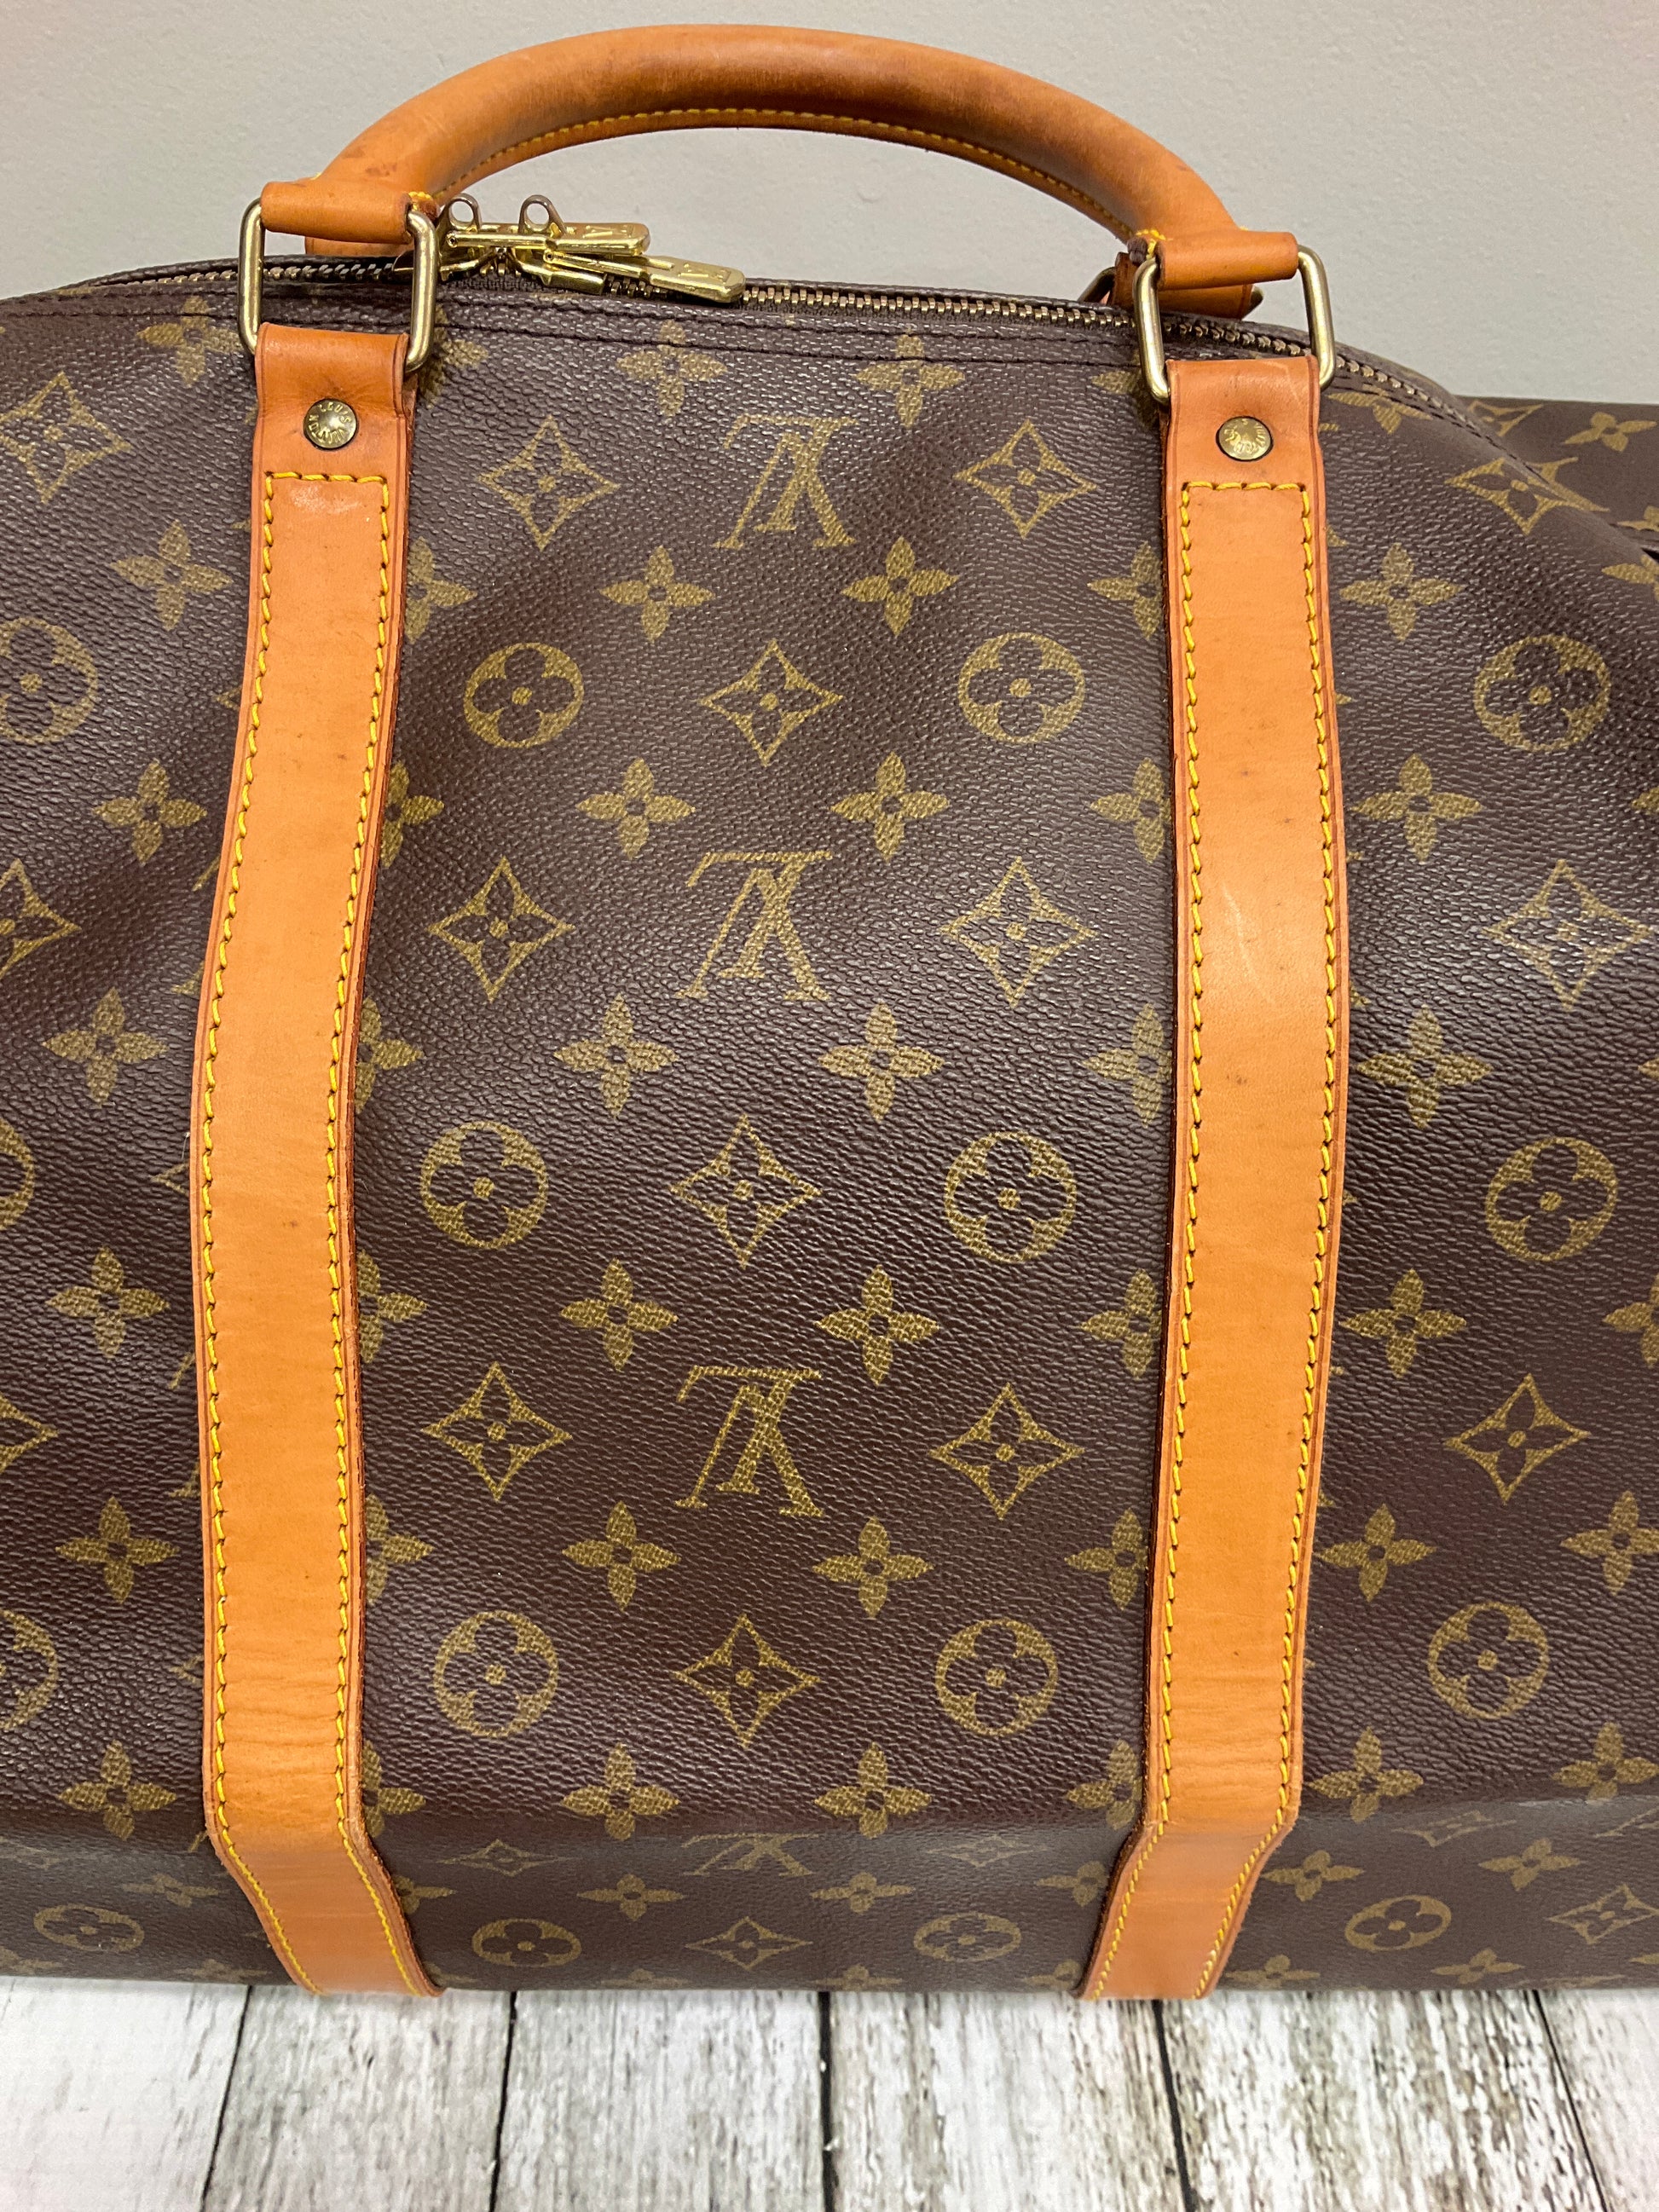 Duffle And Weekender Luxury Designer By Louis Vuitton Size: Large